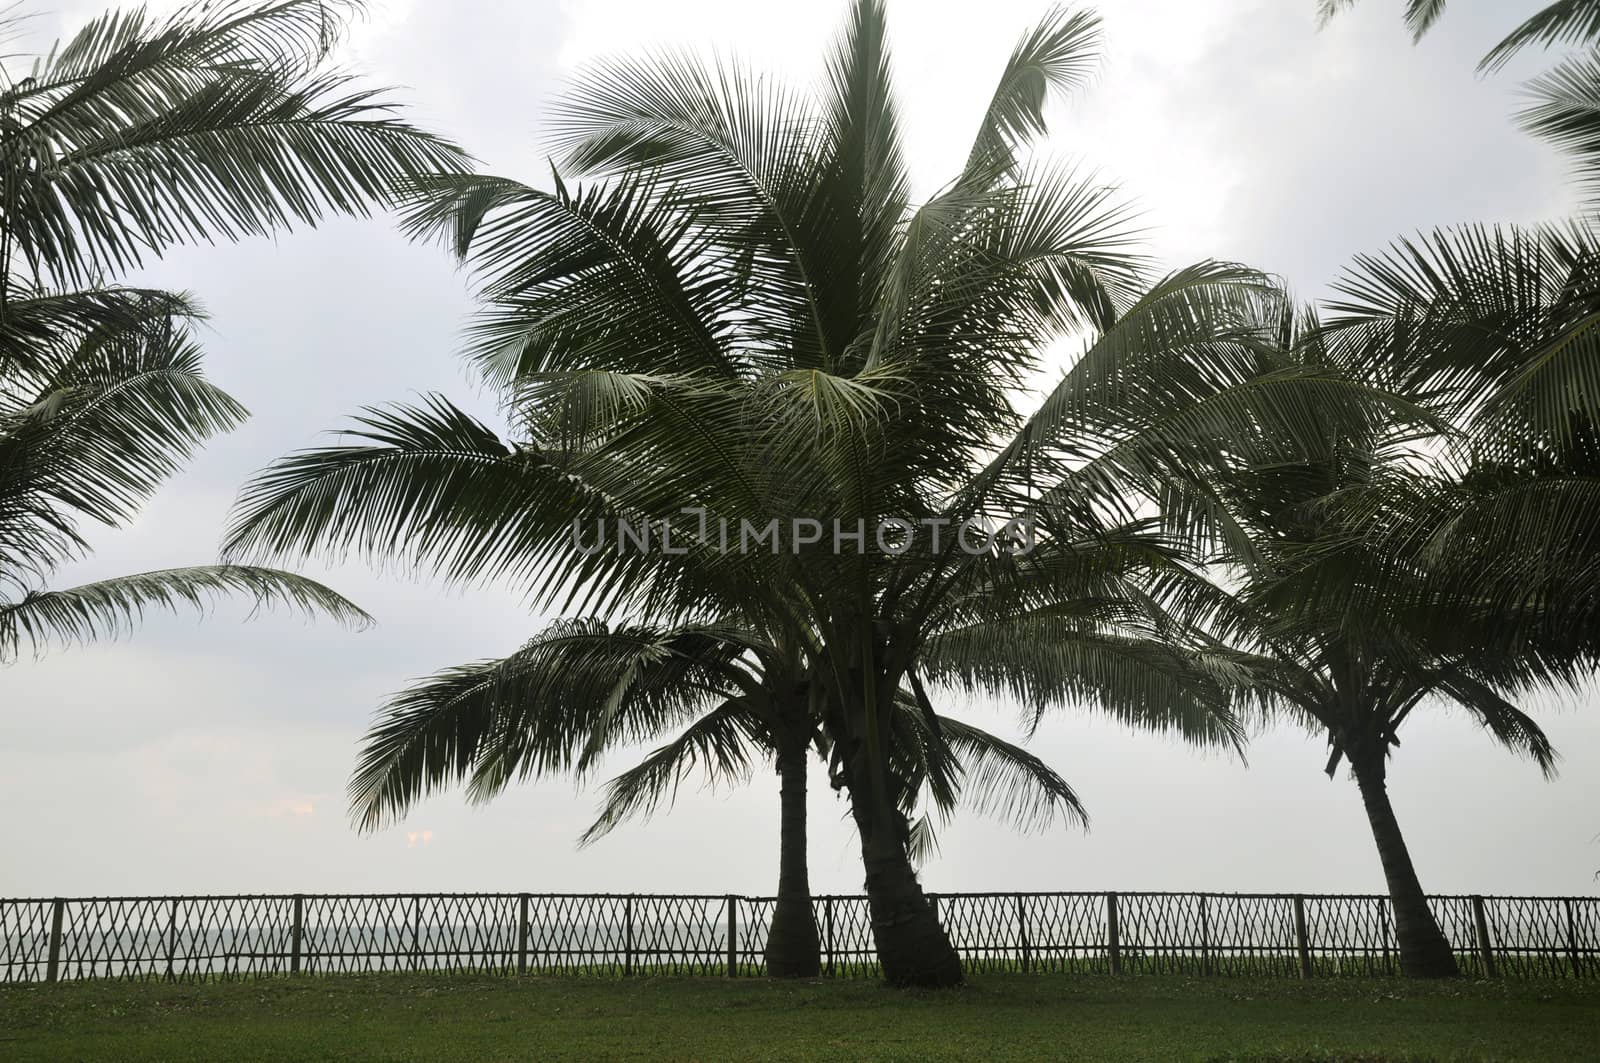 Palm trees against a fence by the beach by kdreams02